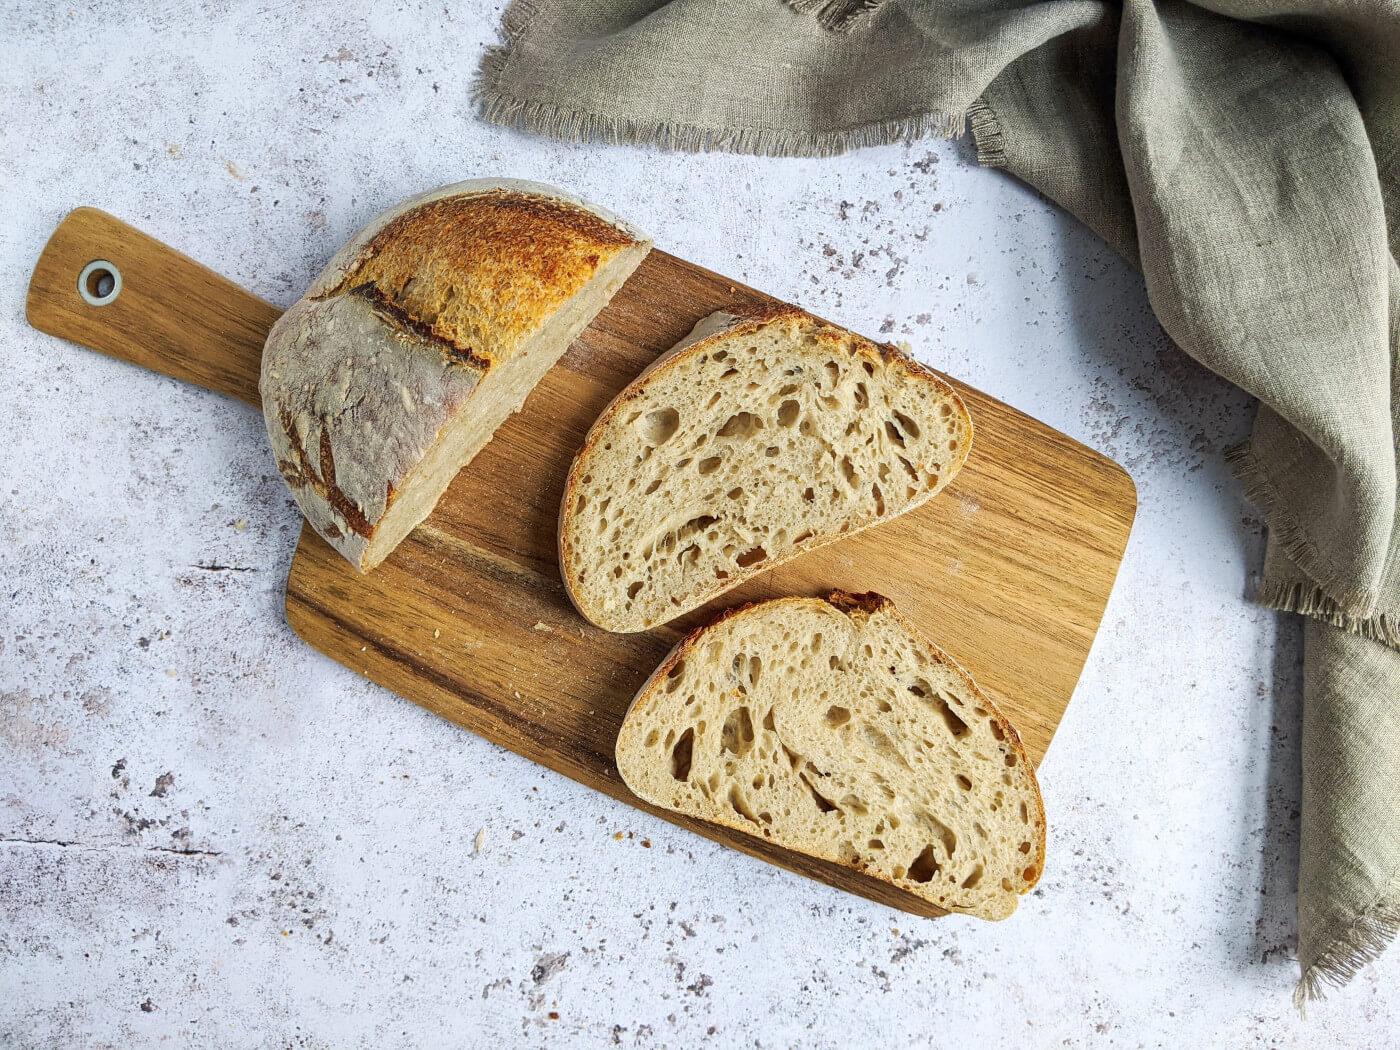 Two slices of bread and half a loaf on a cutting board | Carbs after Bariatric Surgery article